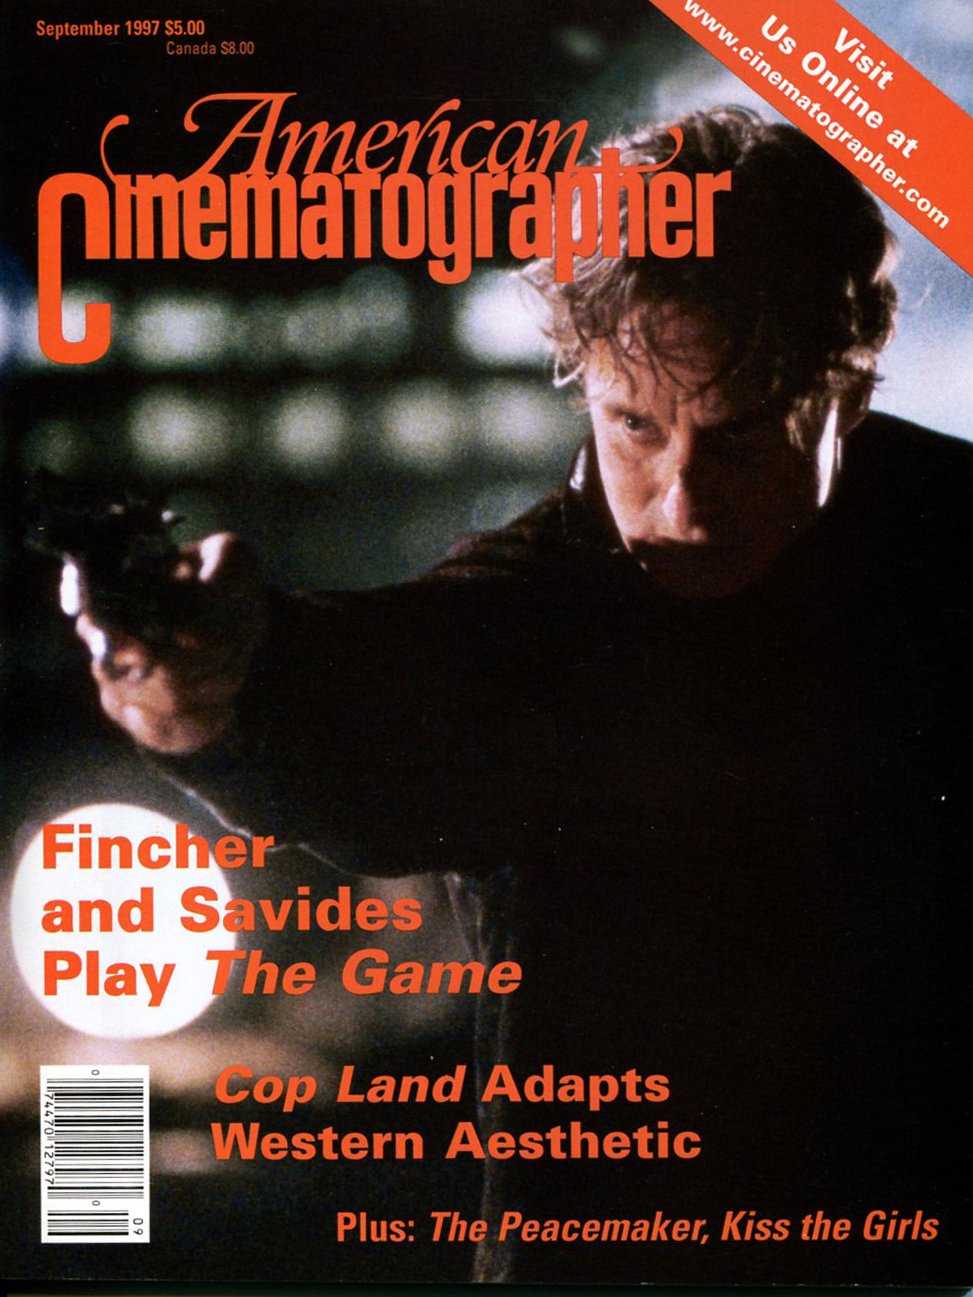 The complete article on the making of The Game was featured in the September 1997 issue of AC. The issue is out of print but the article is available in PDF form. (Just click on this image.)